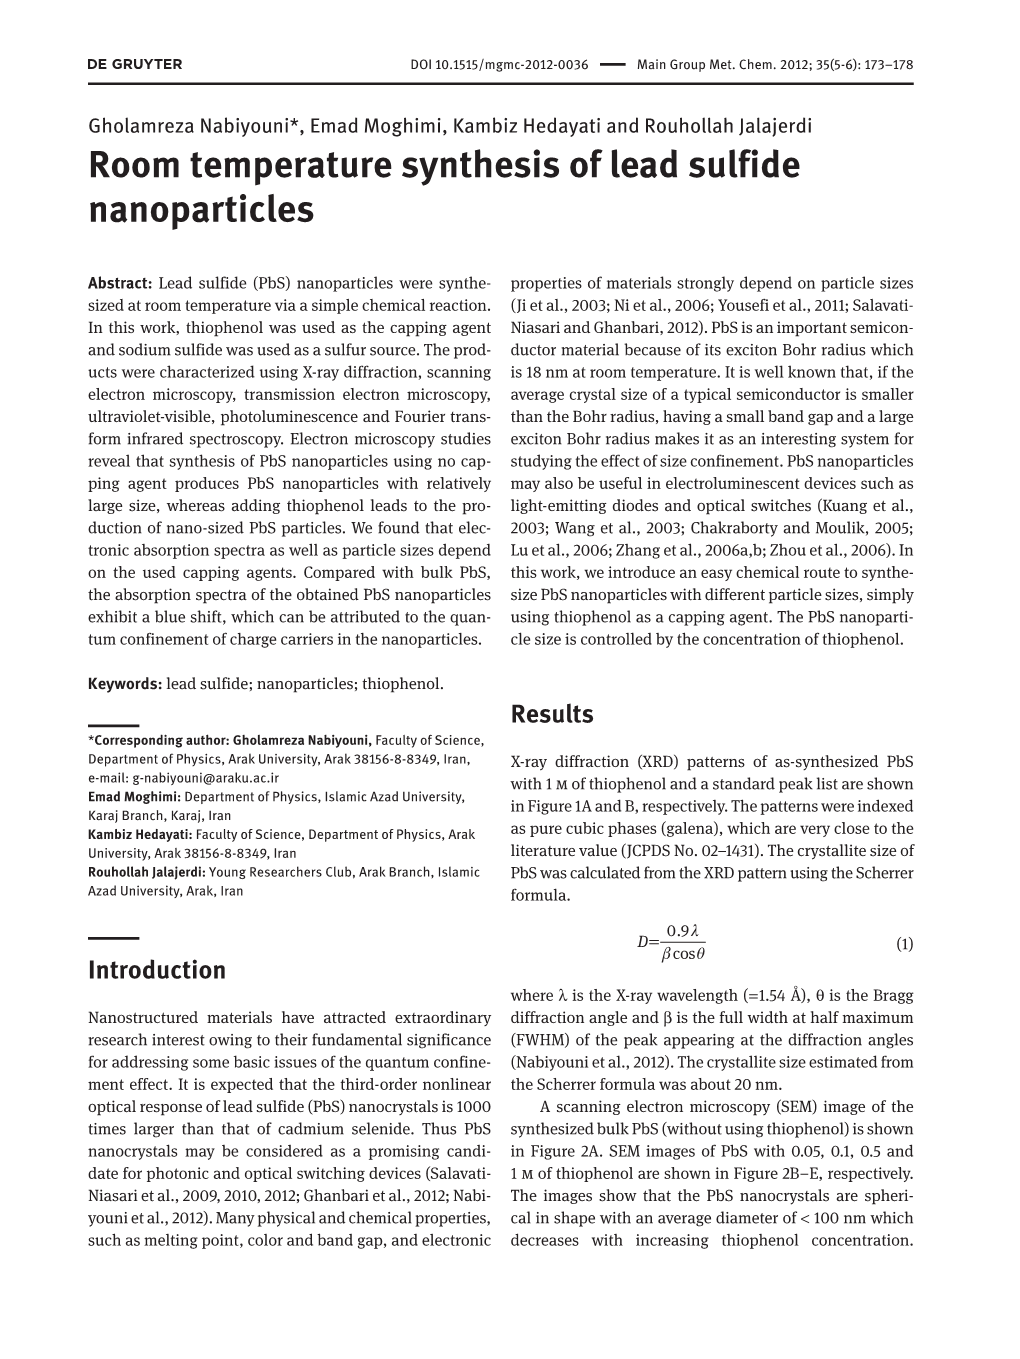 Room Temperature Synthesis of Lead Sulfide Nanoparticles